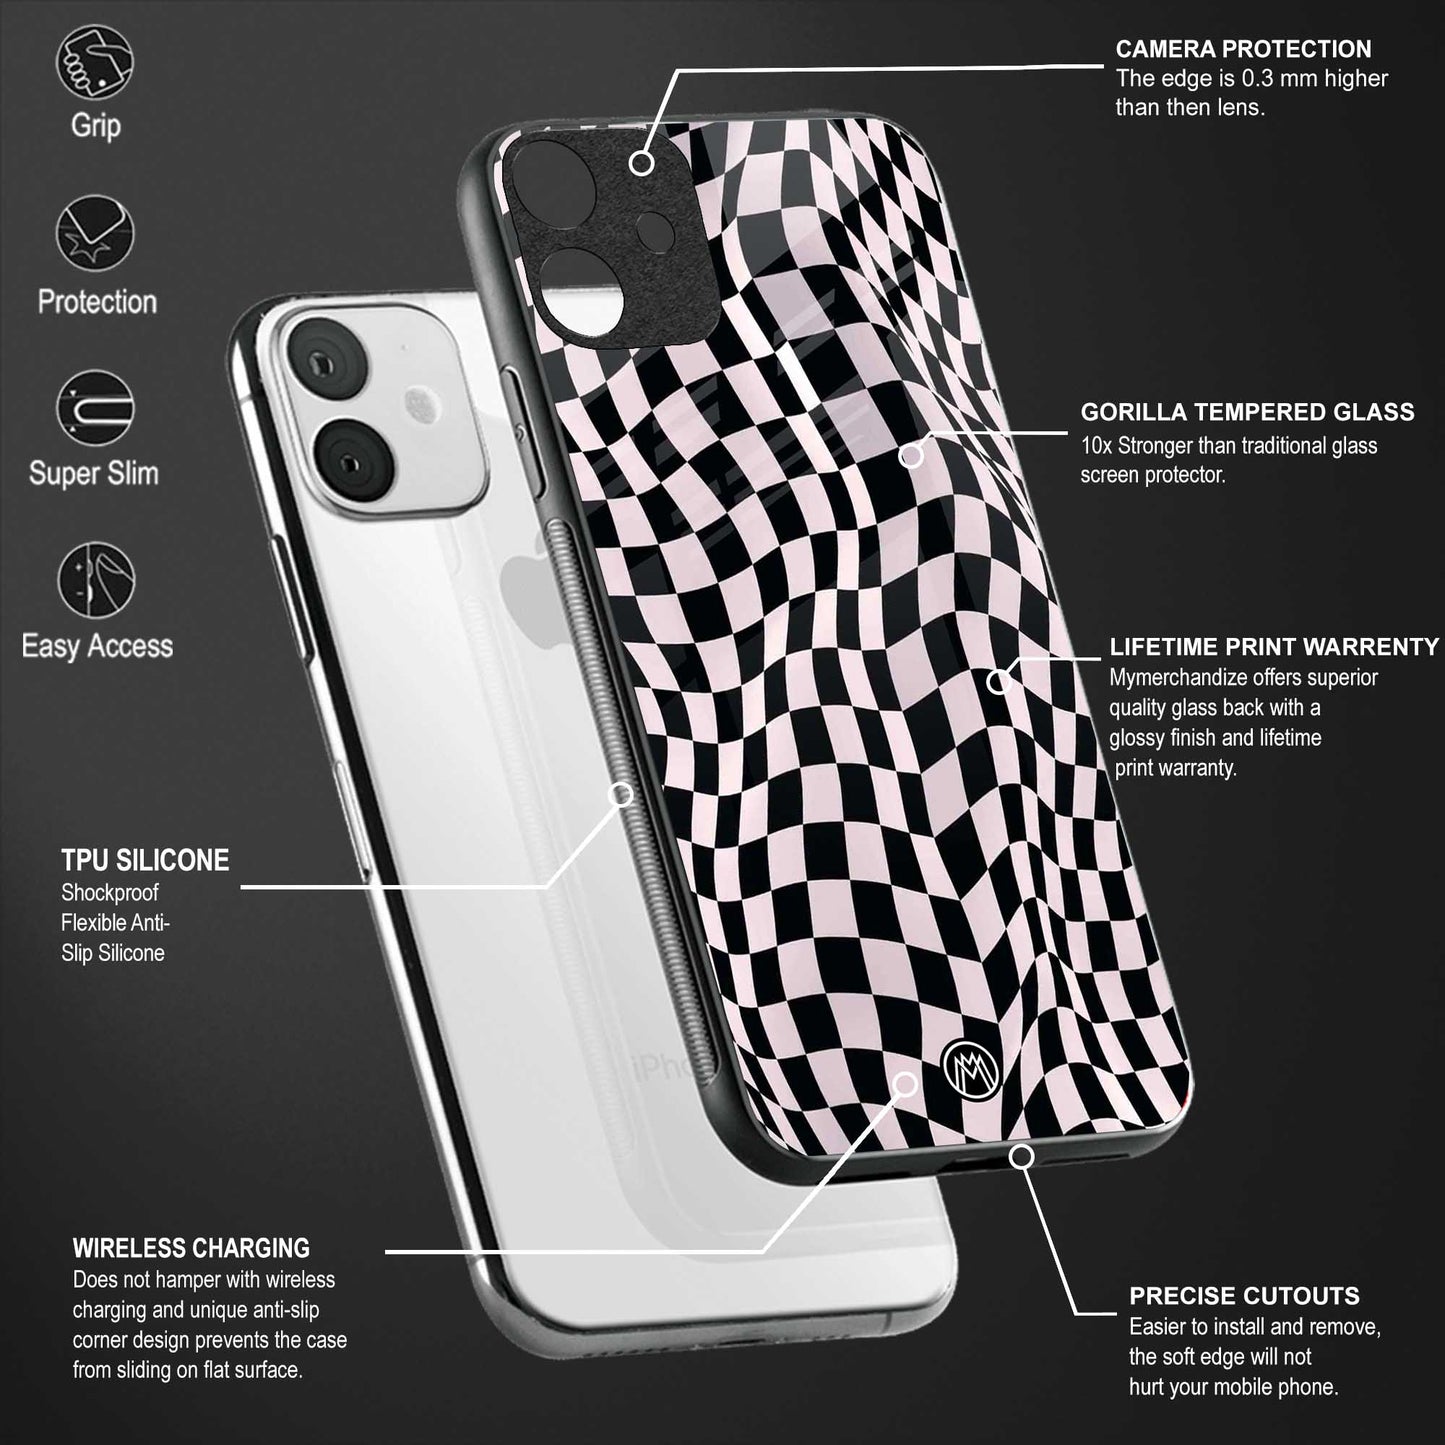 trippy b&w check pattern glass case for iphone 6 image-4